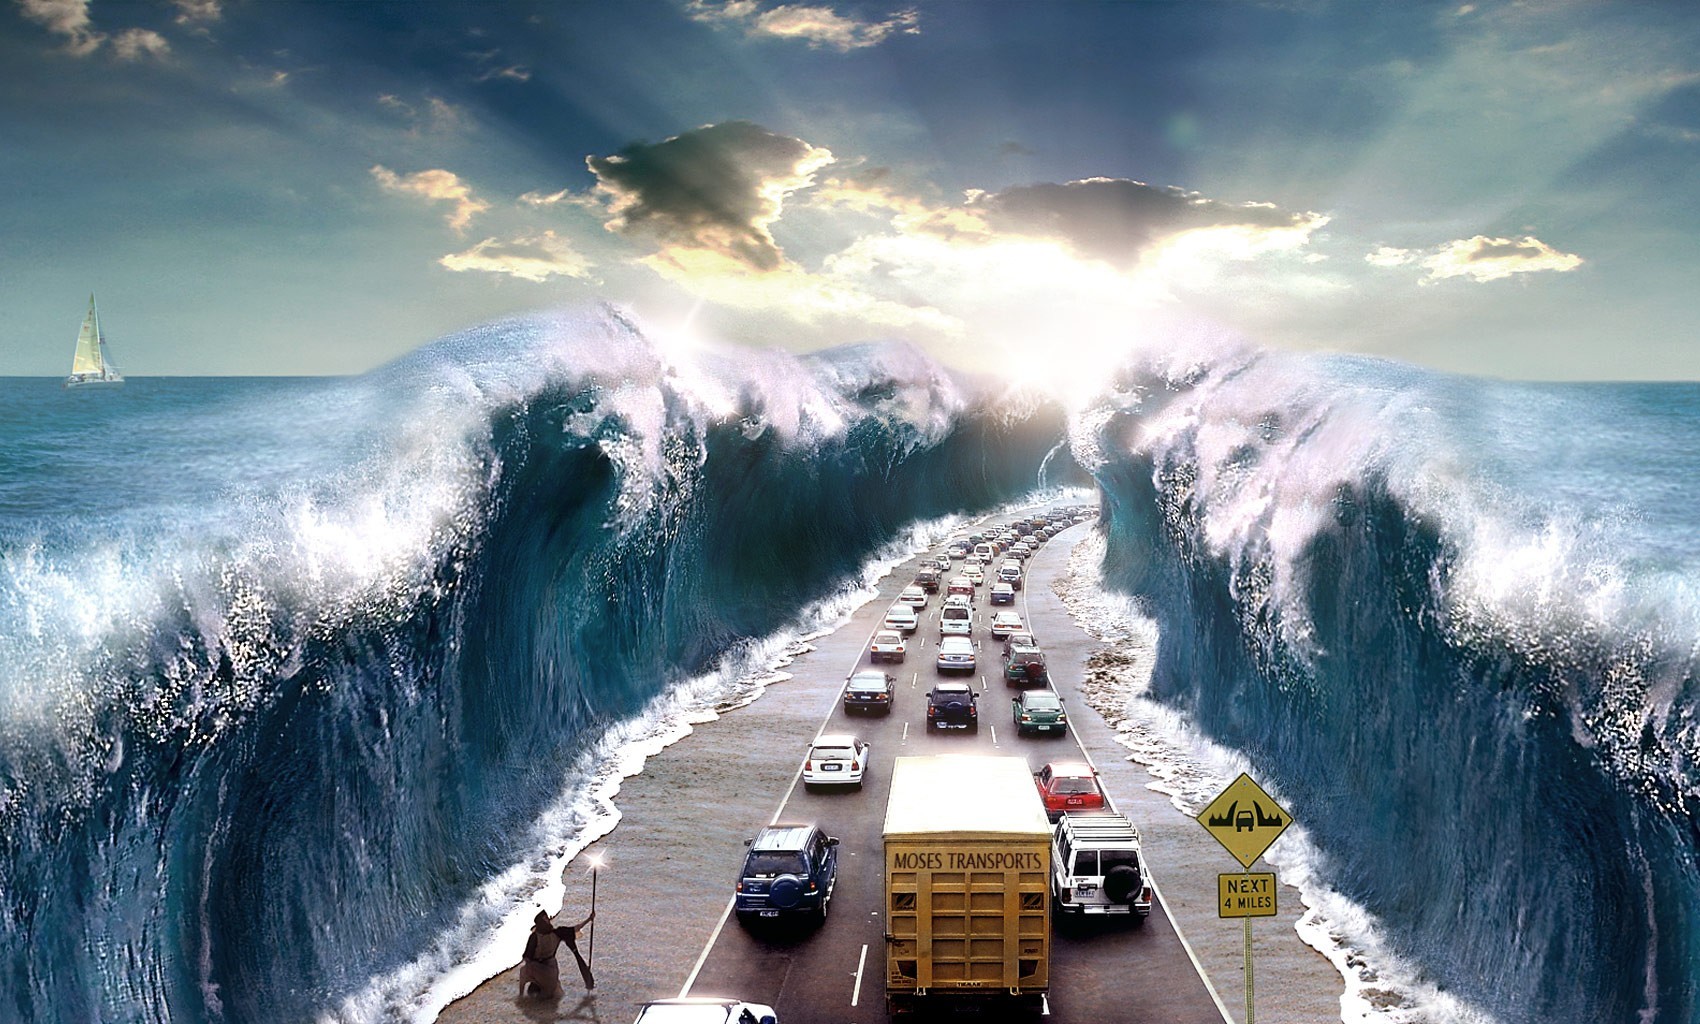  Wallpaper on Cars Humor Funny Bible Flood Moses Hd Wallpaper   Funny   Humour